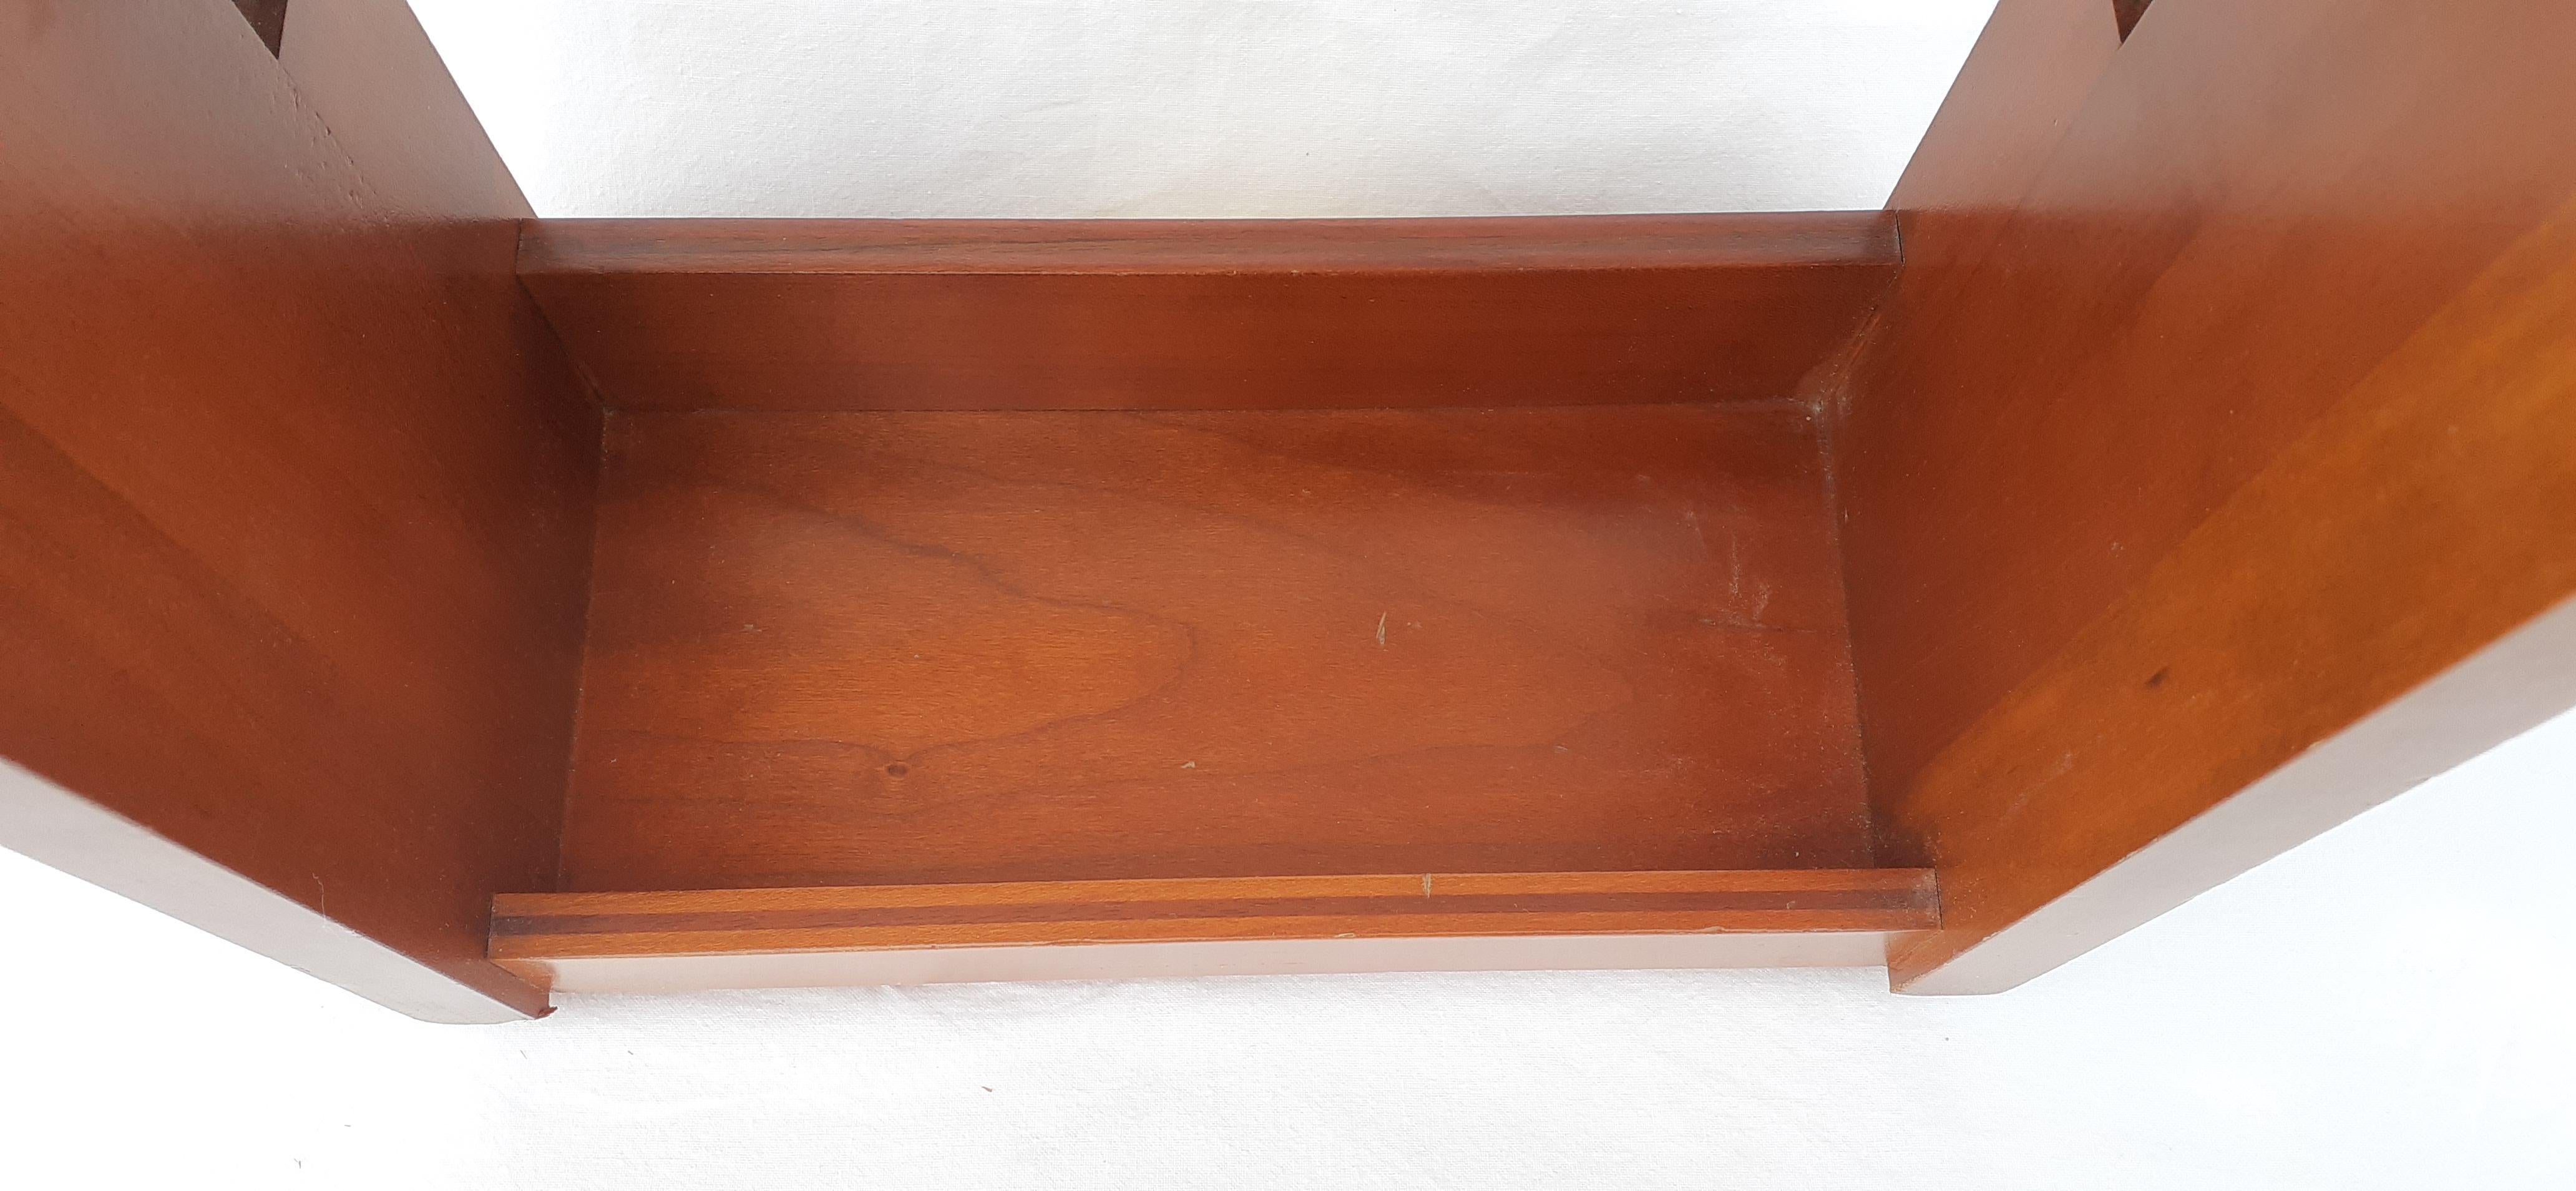 Exceptional Hermès Showjumping Equestrian Jump Shaped Scarves Hanger Wood RARE For Sale 1